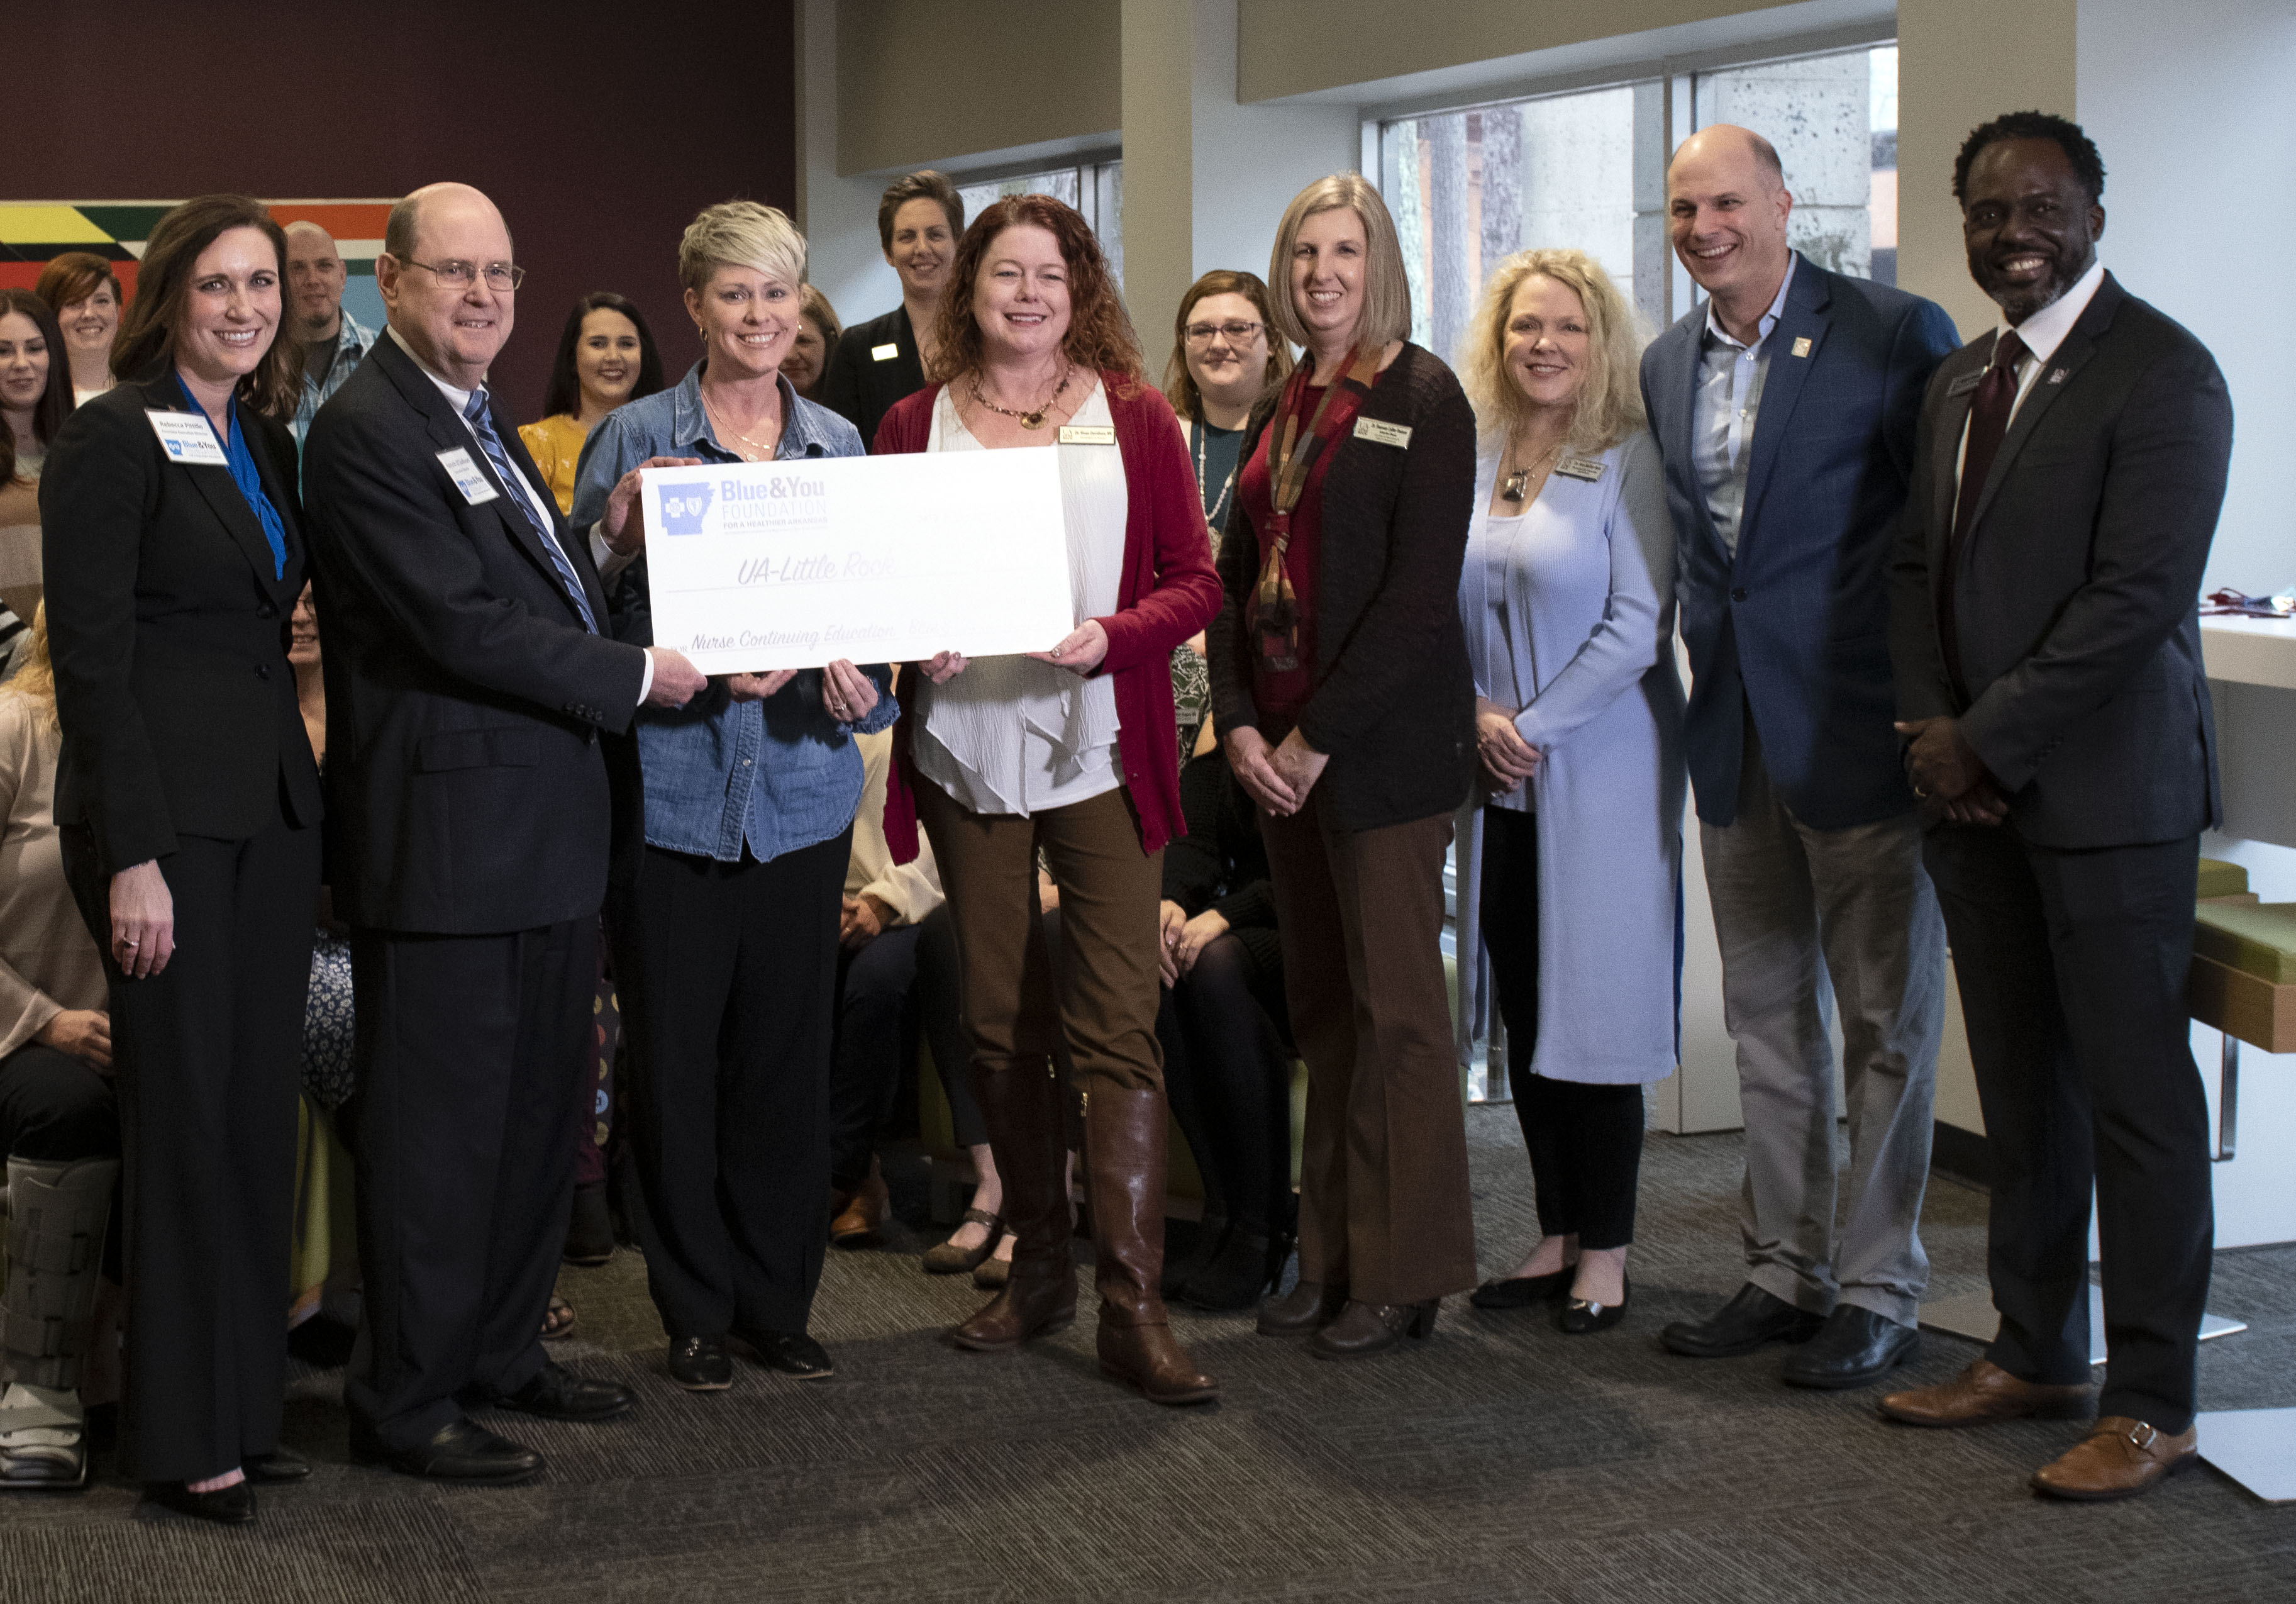 Members of the Blue & You Foundation and the University of Arkansas at Little Rock celebrate a grant to build a new continuing education center in the Department of Nursing. Photo by Brad Sims.